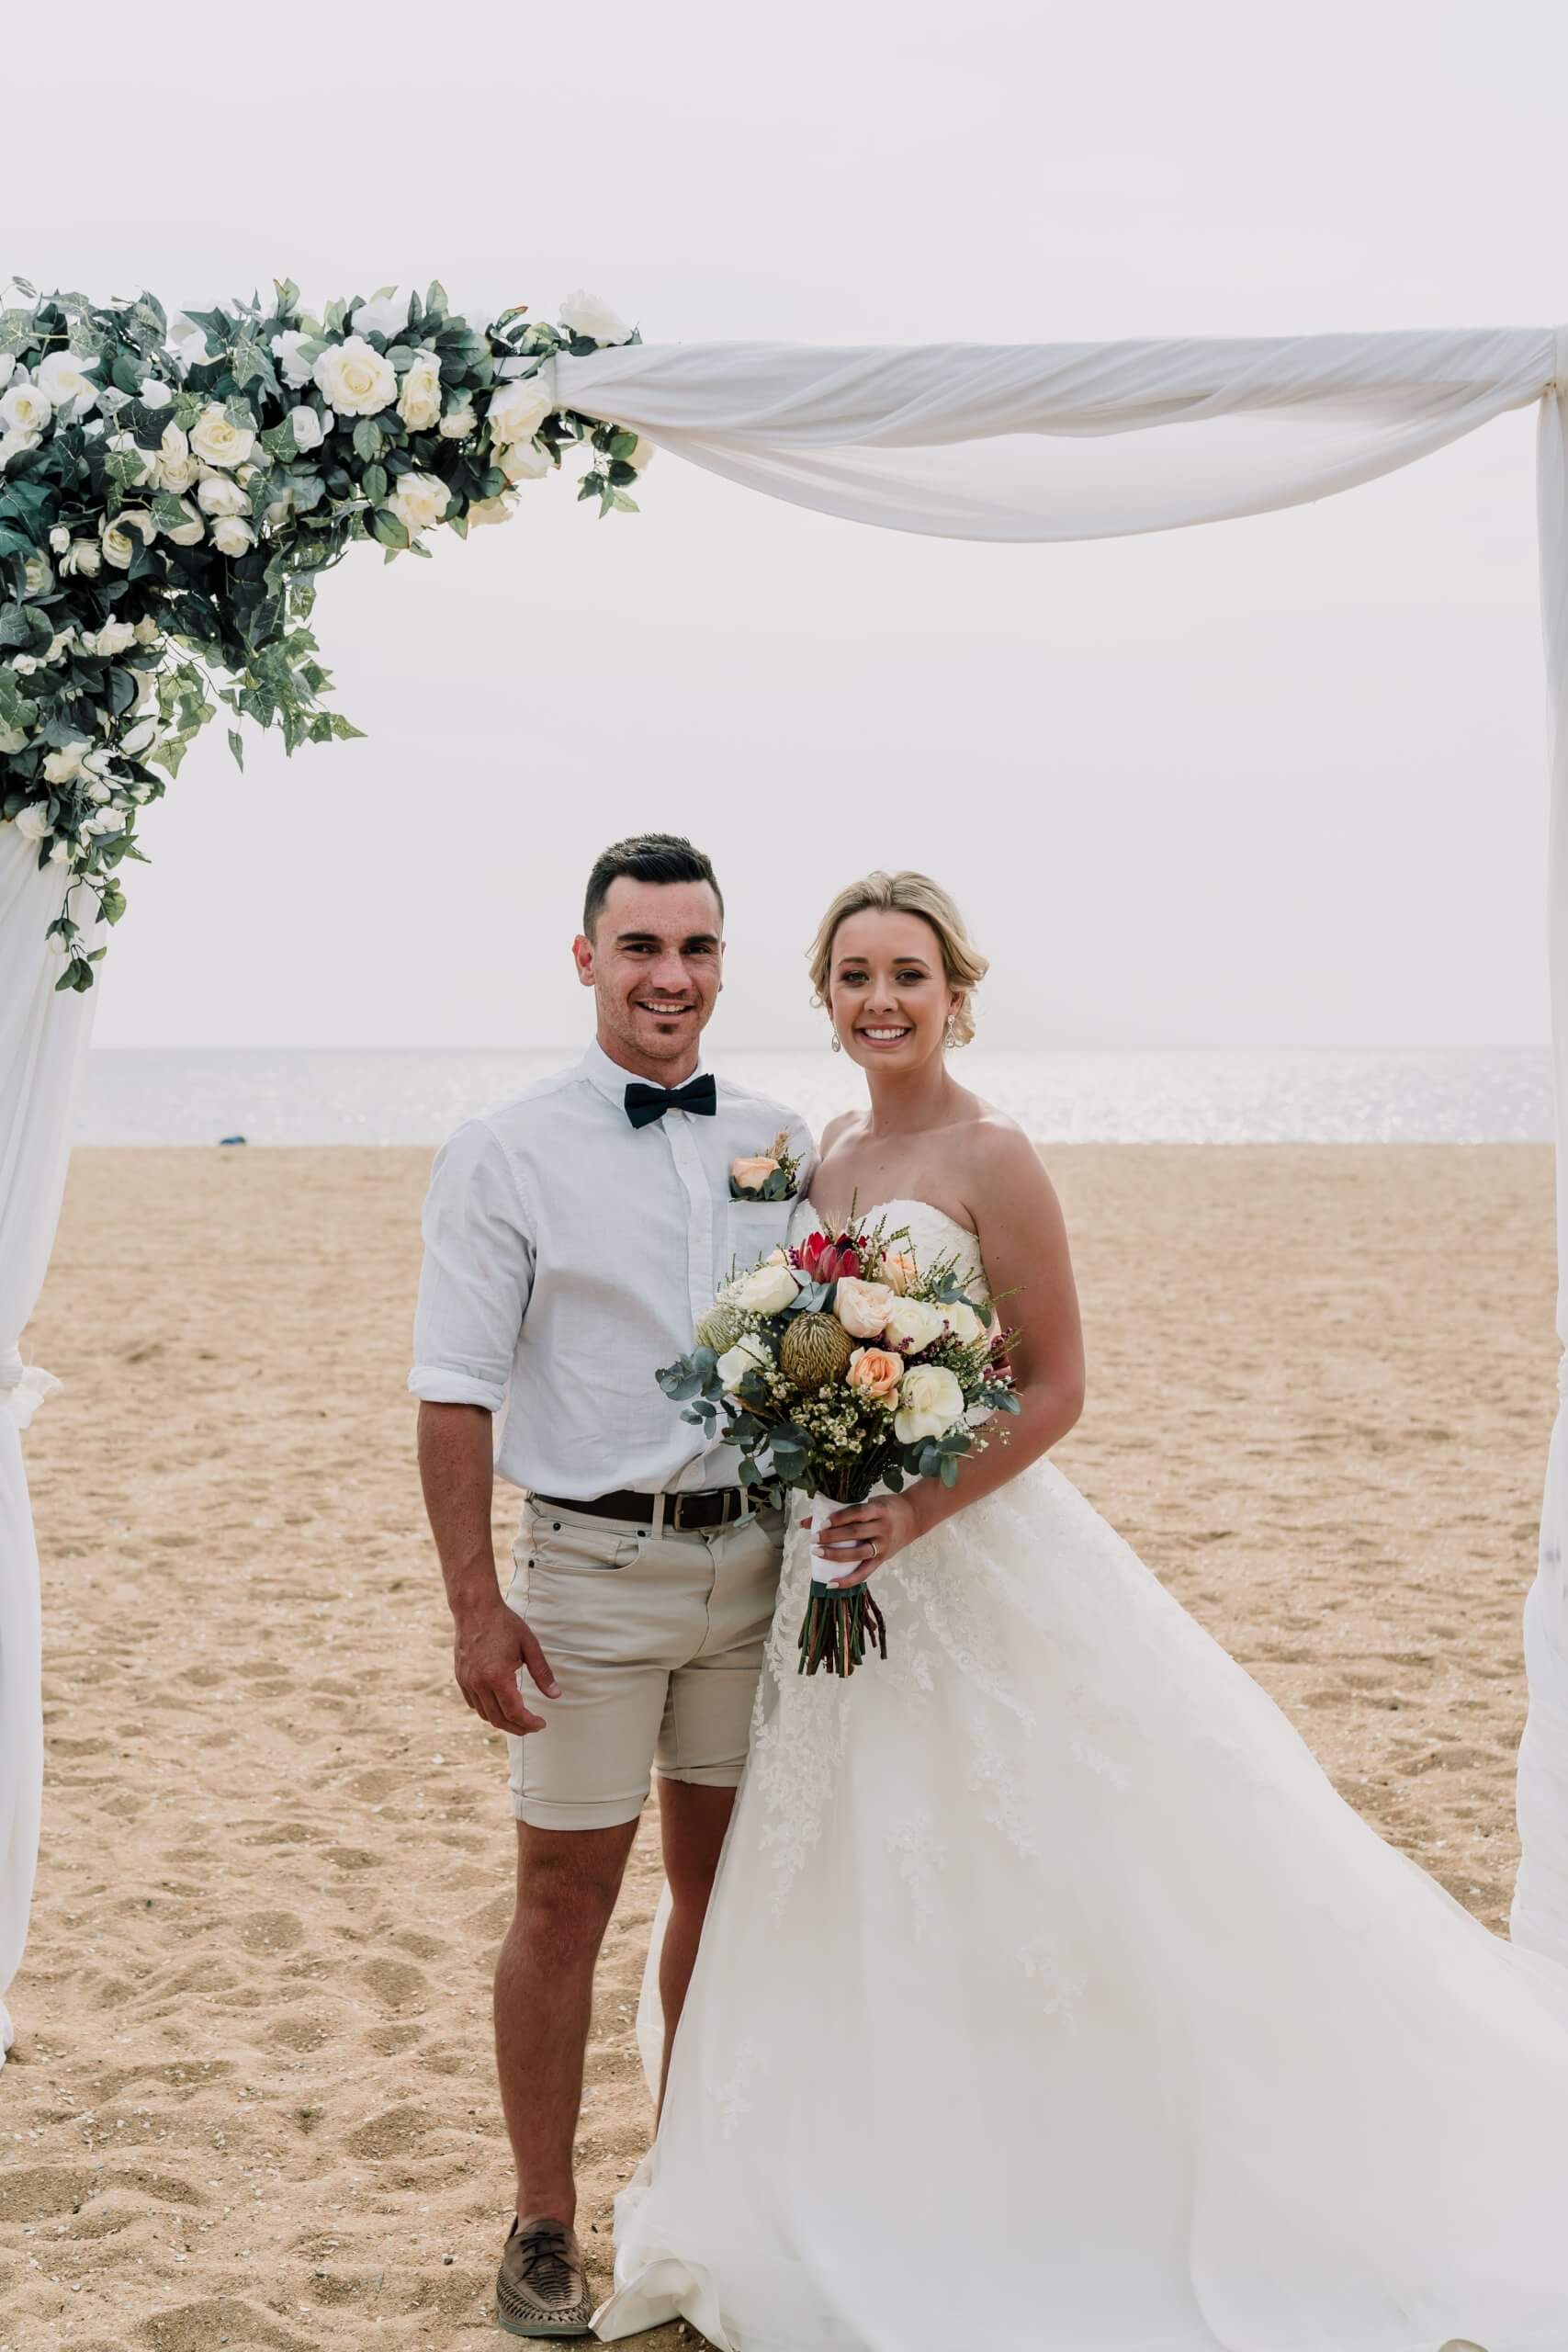 Portrait photo of the bride and groom under the wedding arch at their beach wedding.